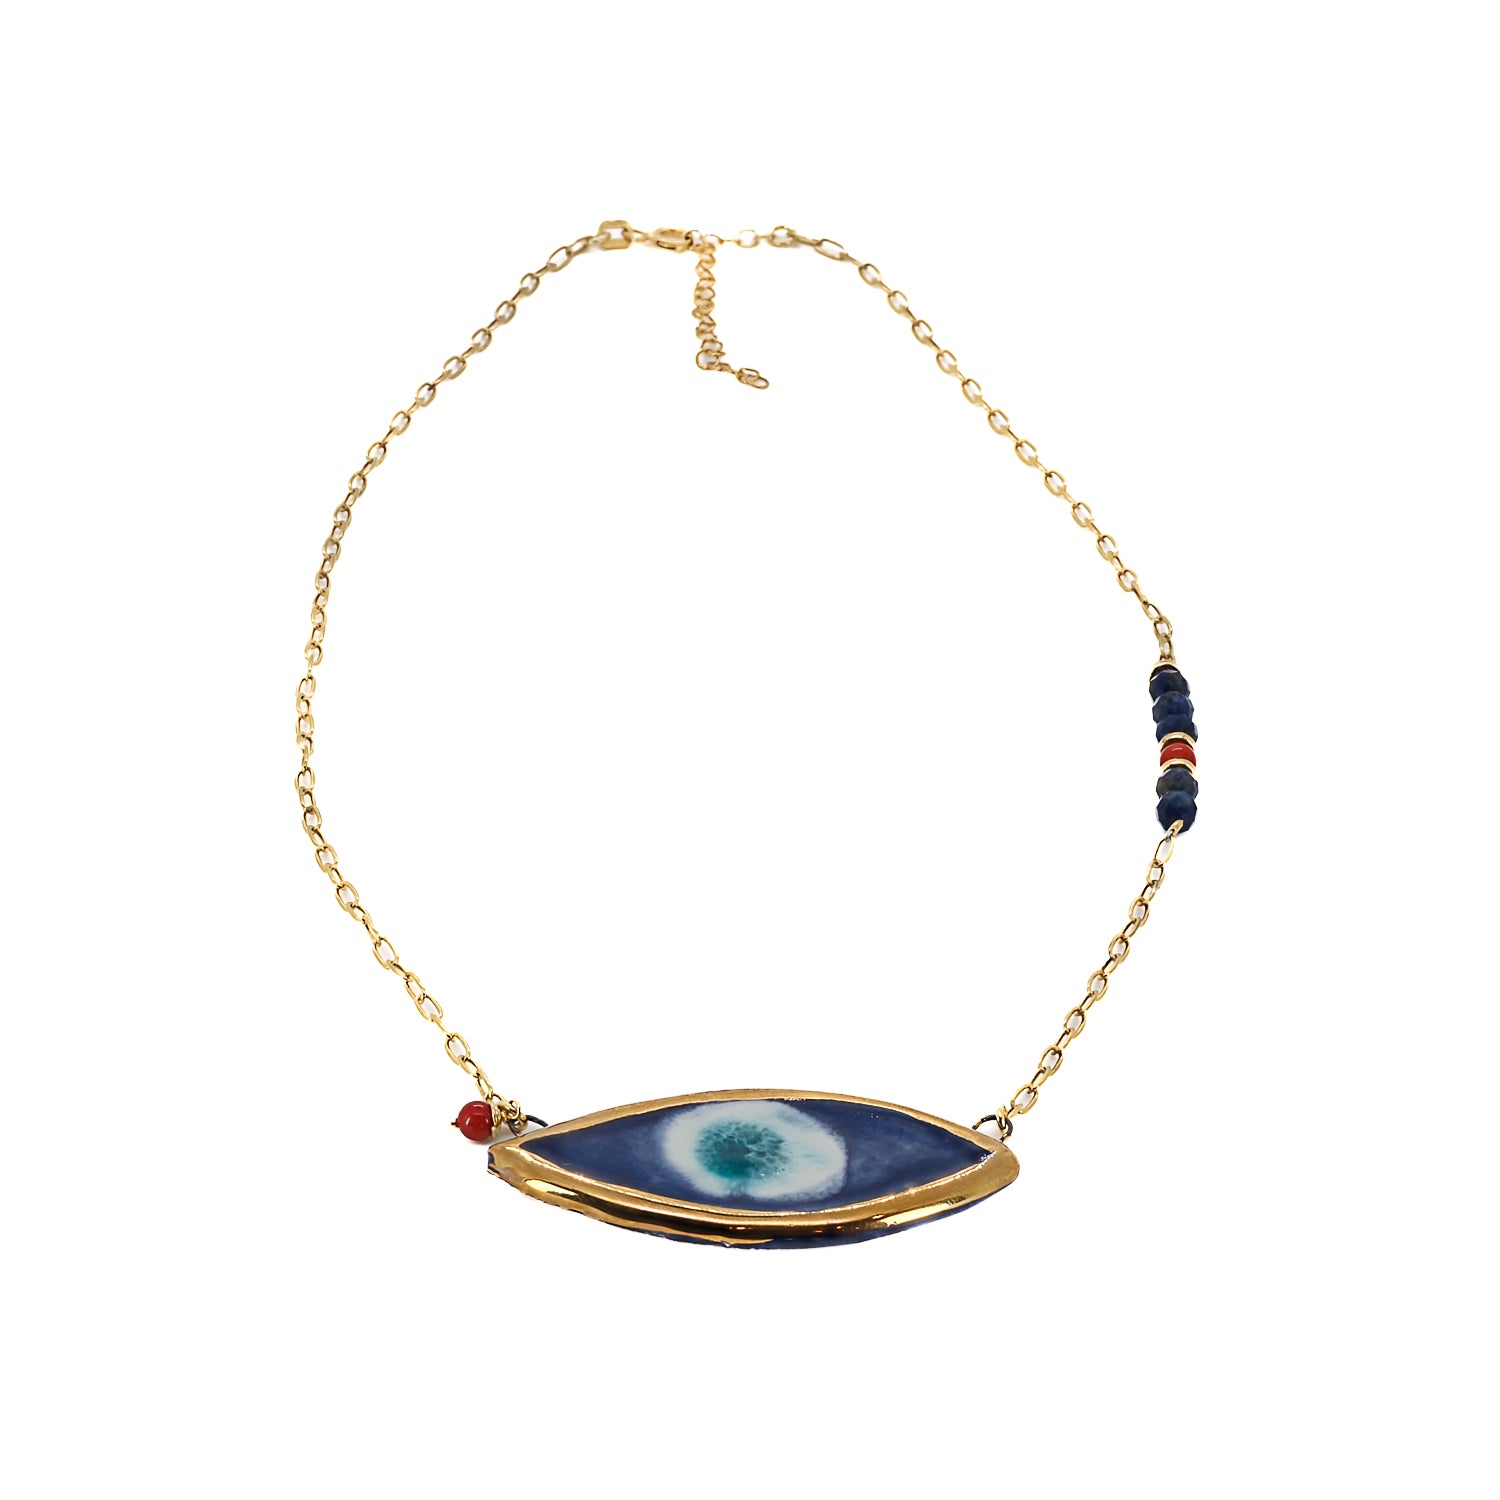 Artisanal Beauty - Lapis Lazuli and Coral Stones Necklace.